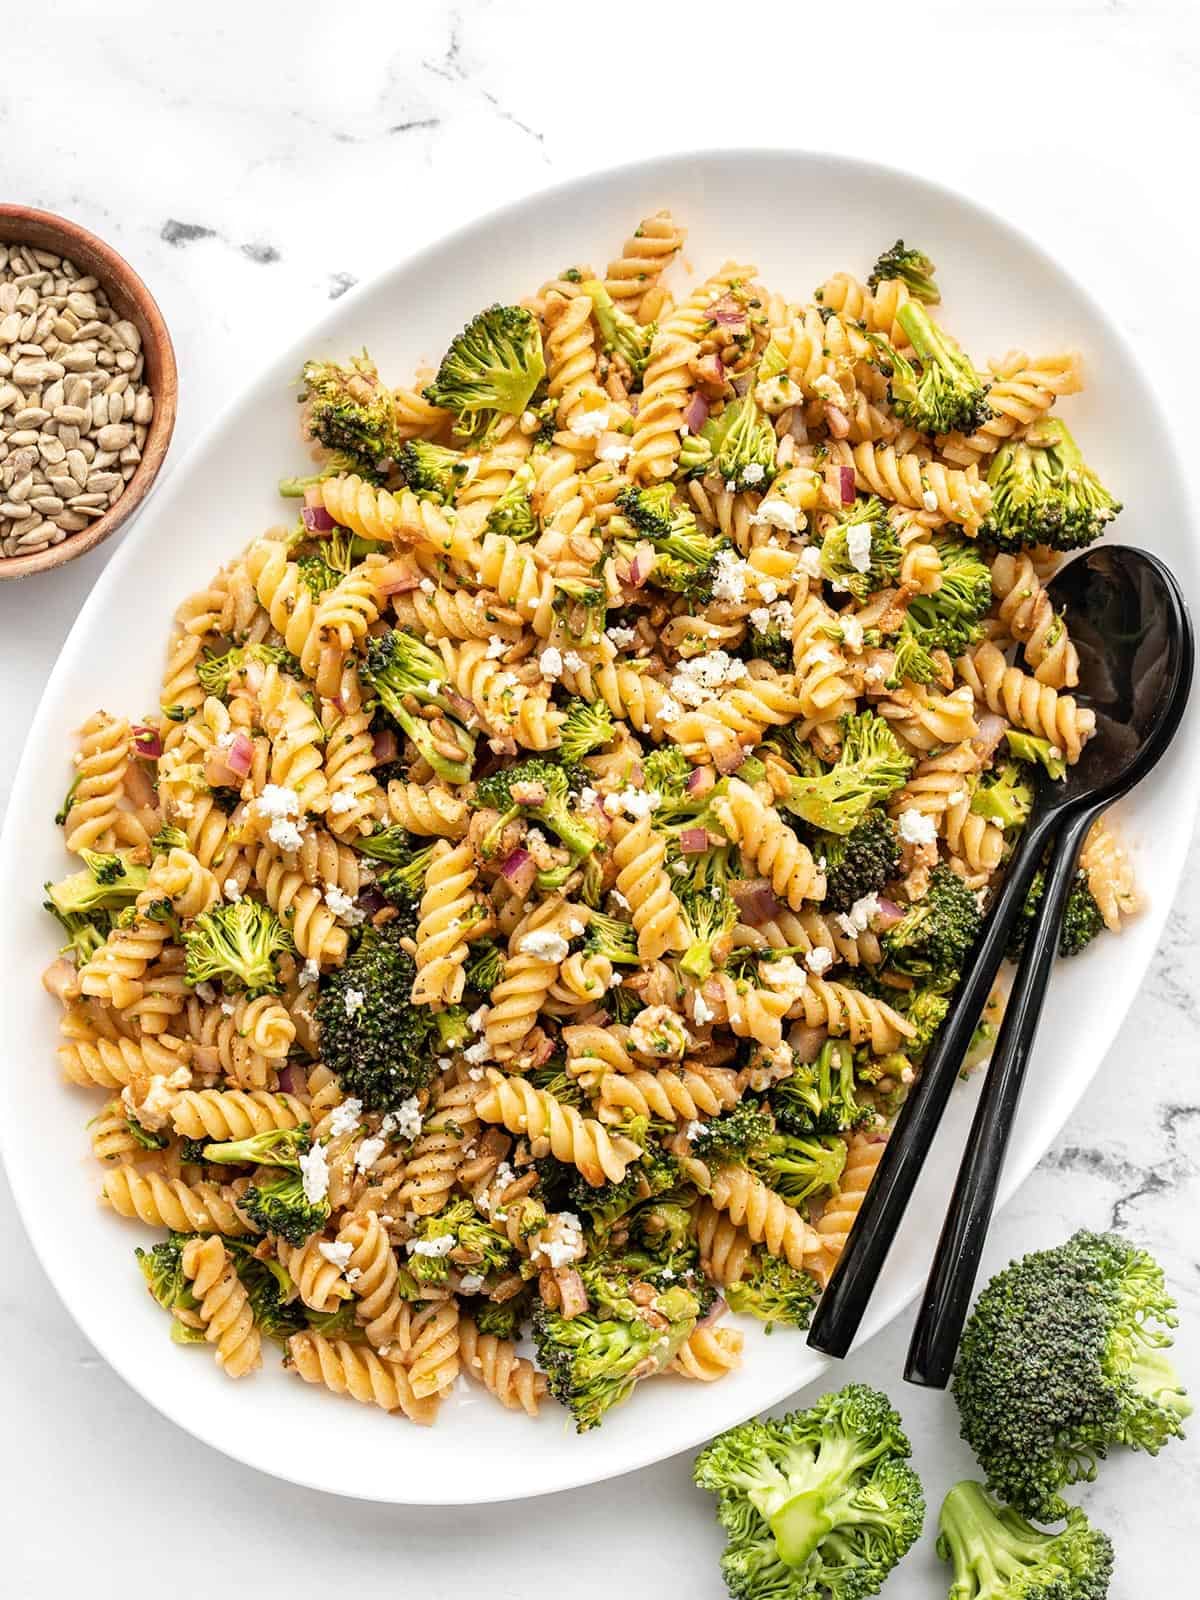 Overhead of an oval serving tray full of broccoli pasta salad with black utensils in the side